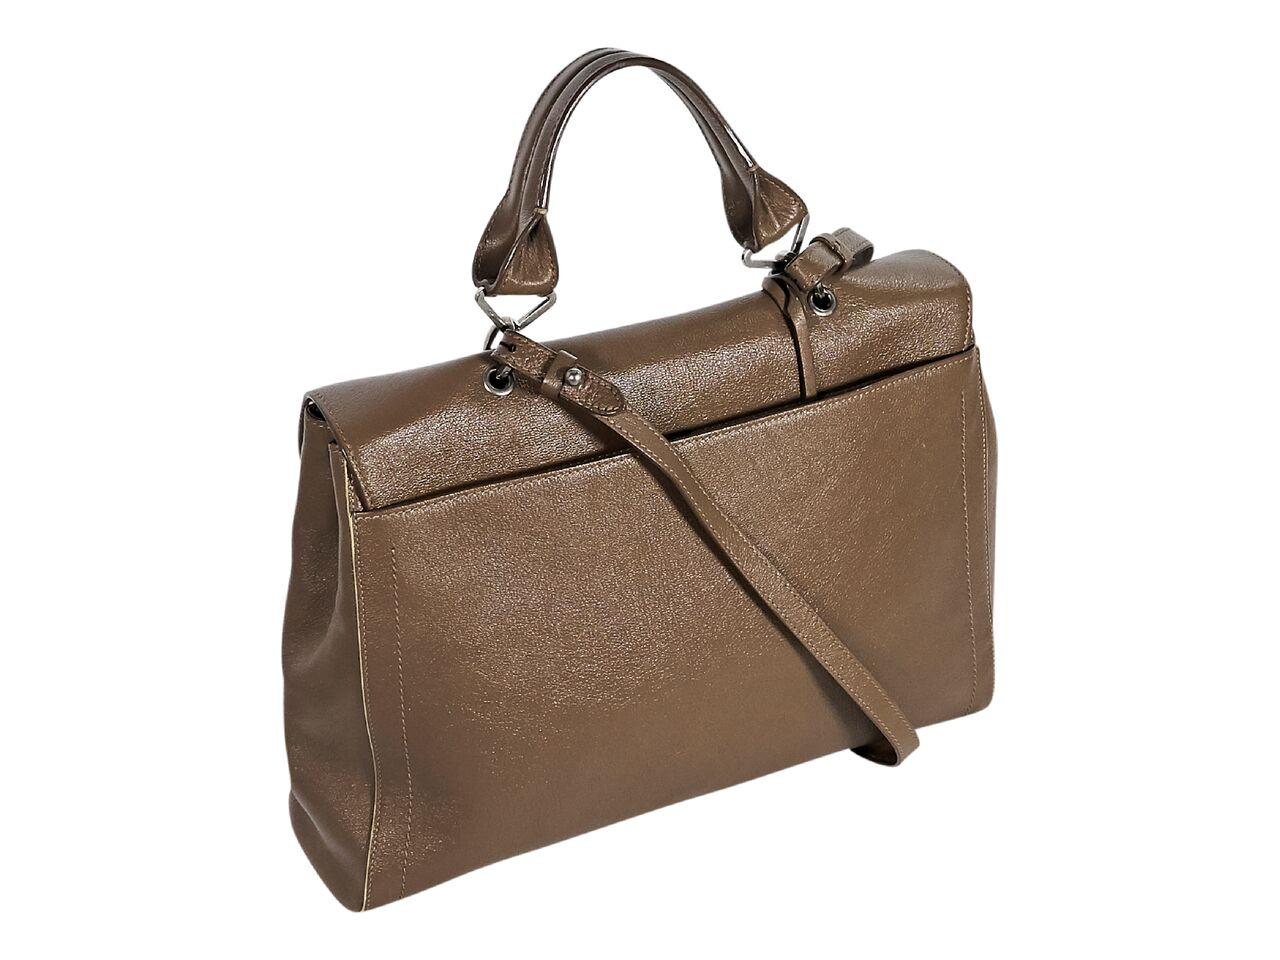 Product details:  Brown leather satchel by Marc Jacobs.  Top carry handle.  Detachable, adjustable shoulder strap.  Front flap with push-lock closure.  Lined interior with inner zip and slide pockets.  Side snap gussets.  Back exterior slide pocket.